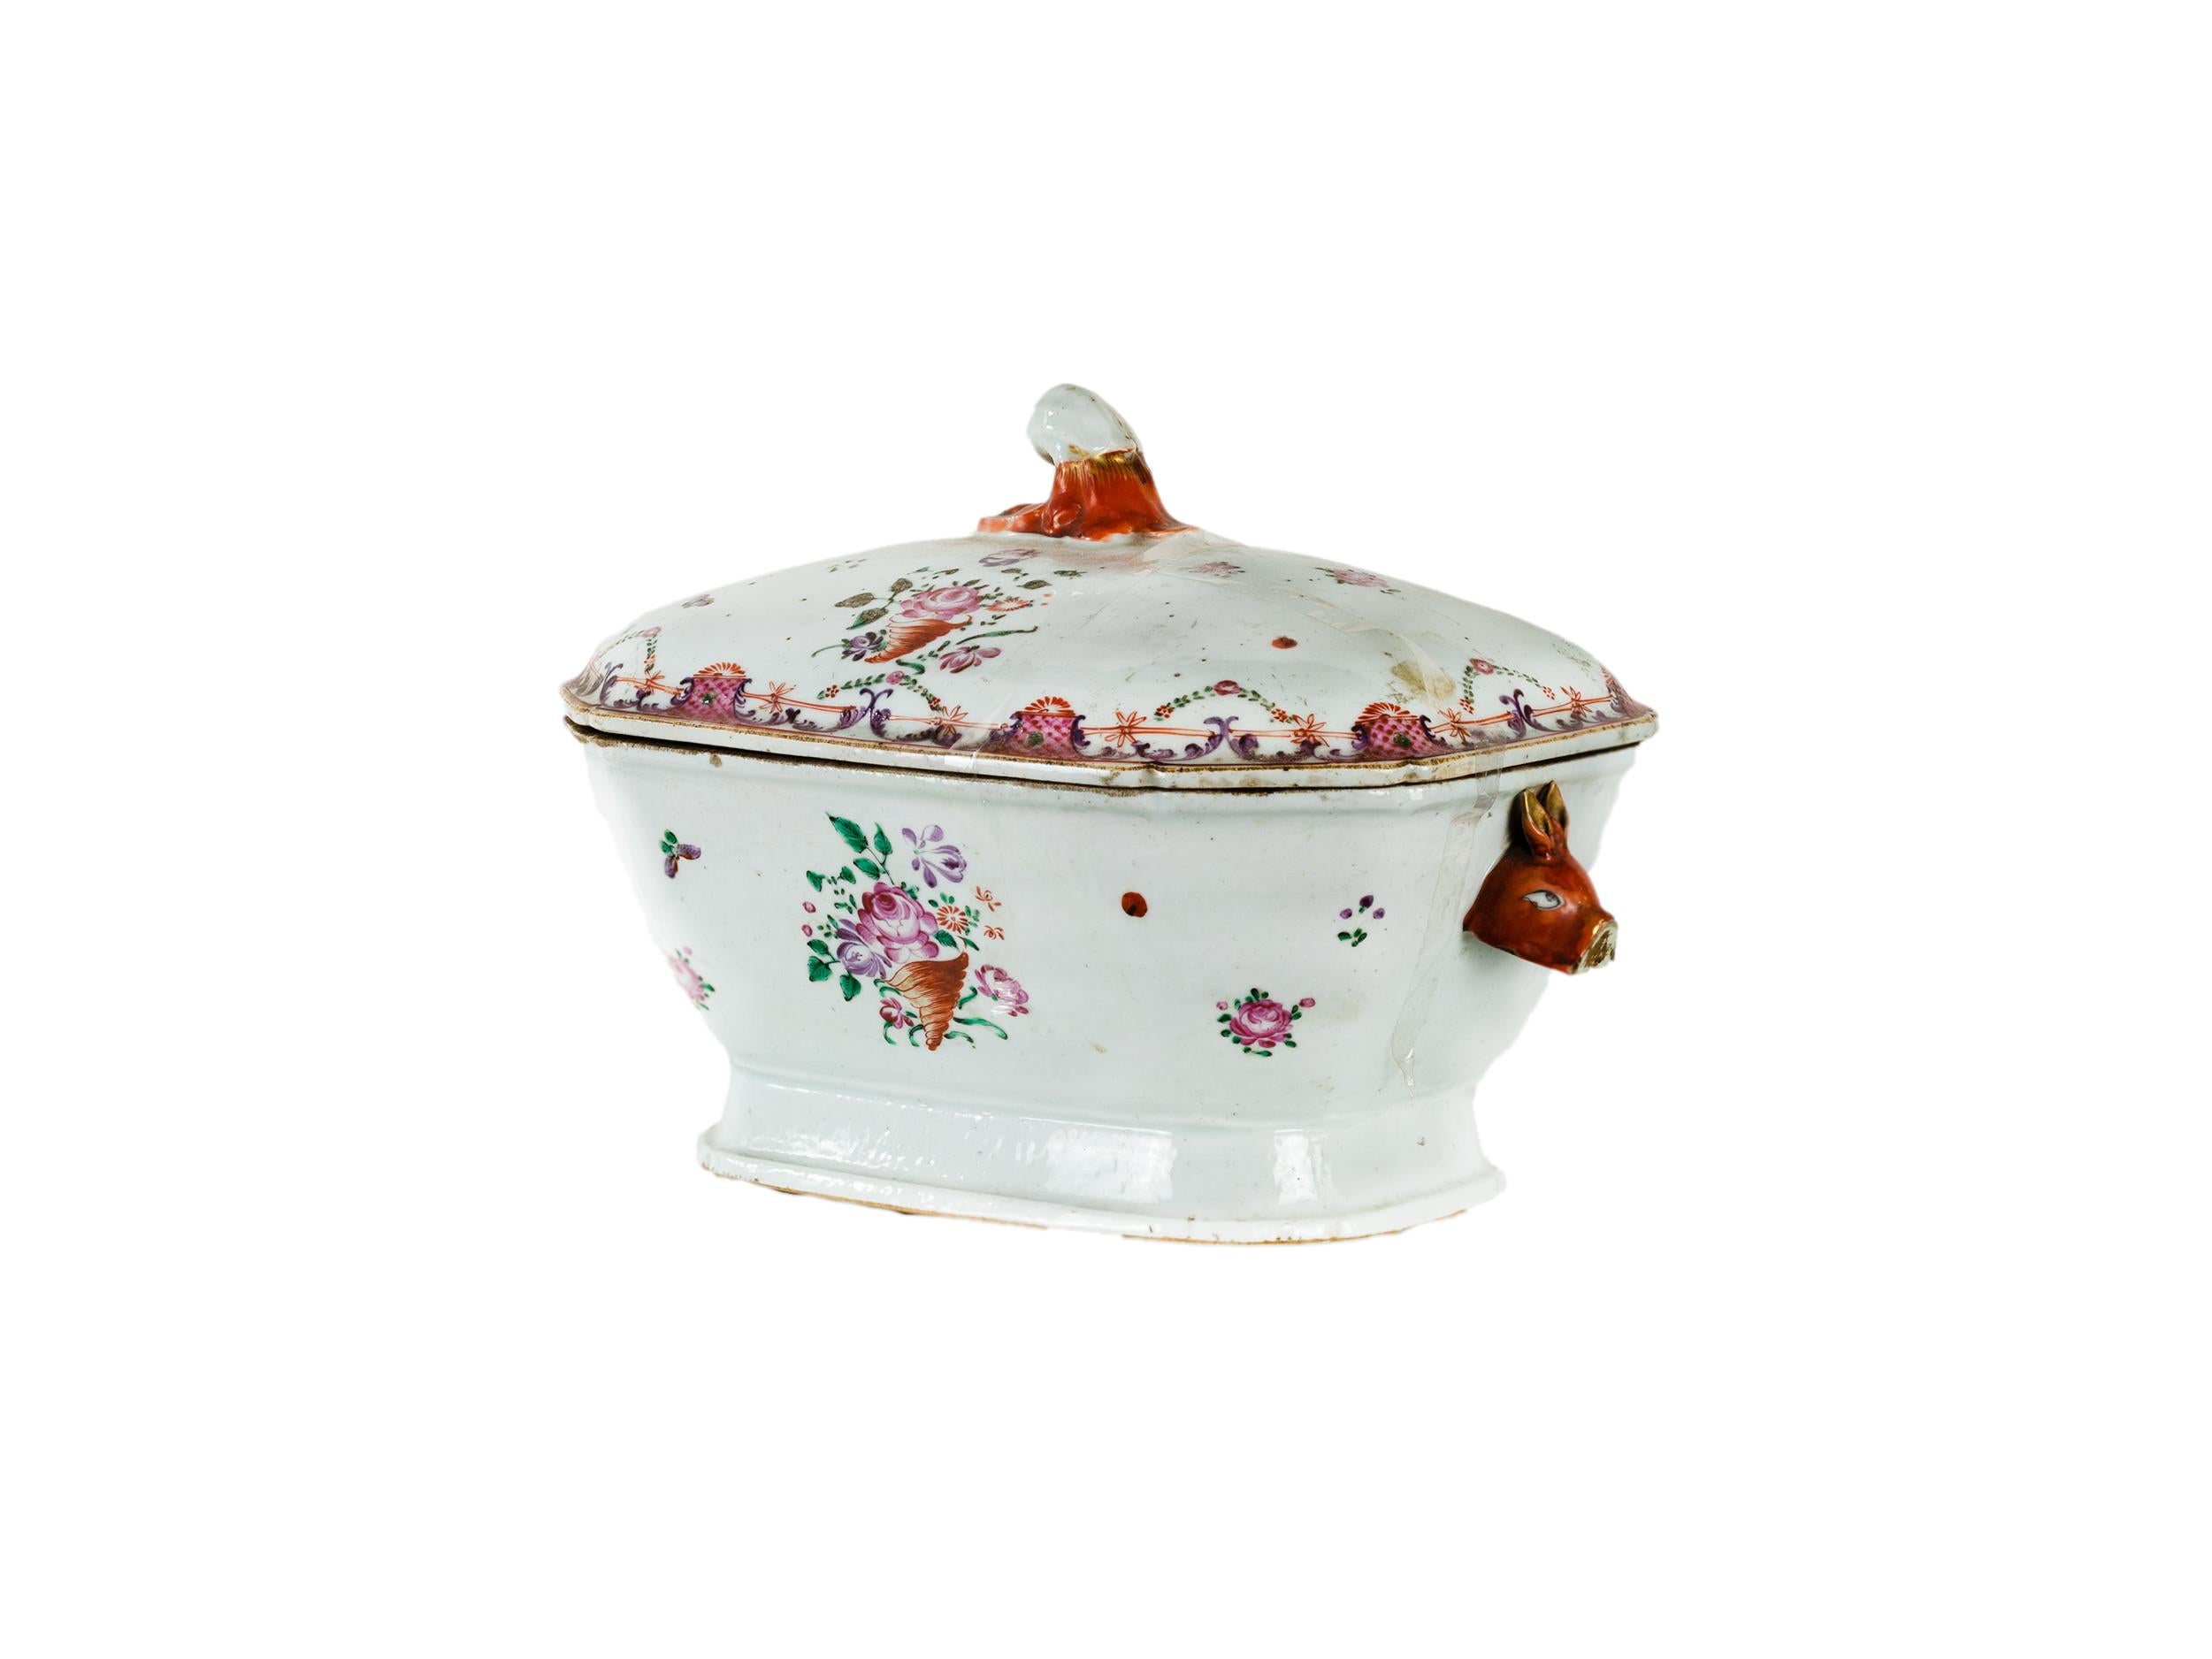 Pink porcelain tureen of the Portuguese India Company ( Companhia das Índias) of the Rose Family.
In white porcelain, red and pink details, floral motif, handles in the shape of a hare's head and lid handle in the shape of a floral bud. 
Piece from